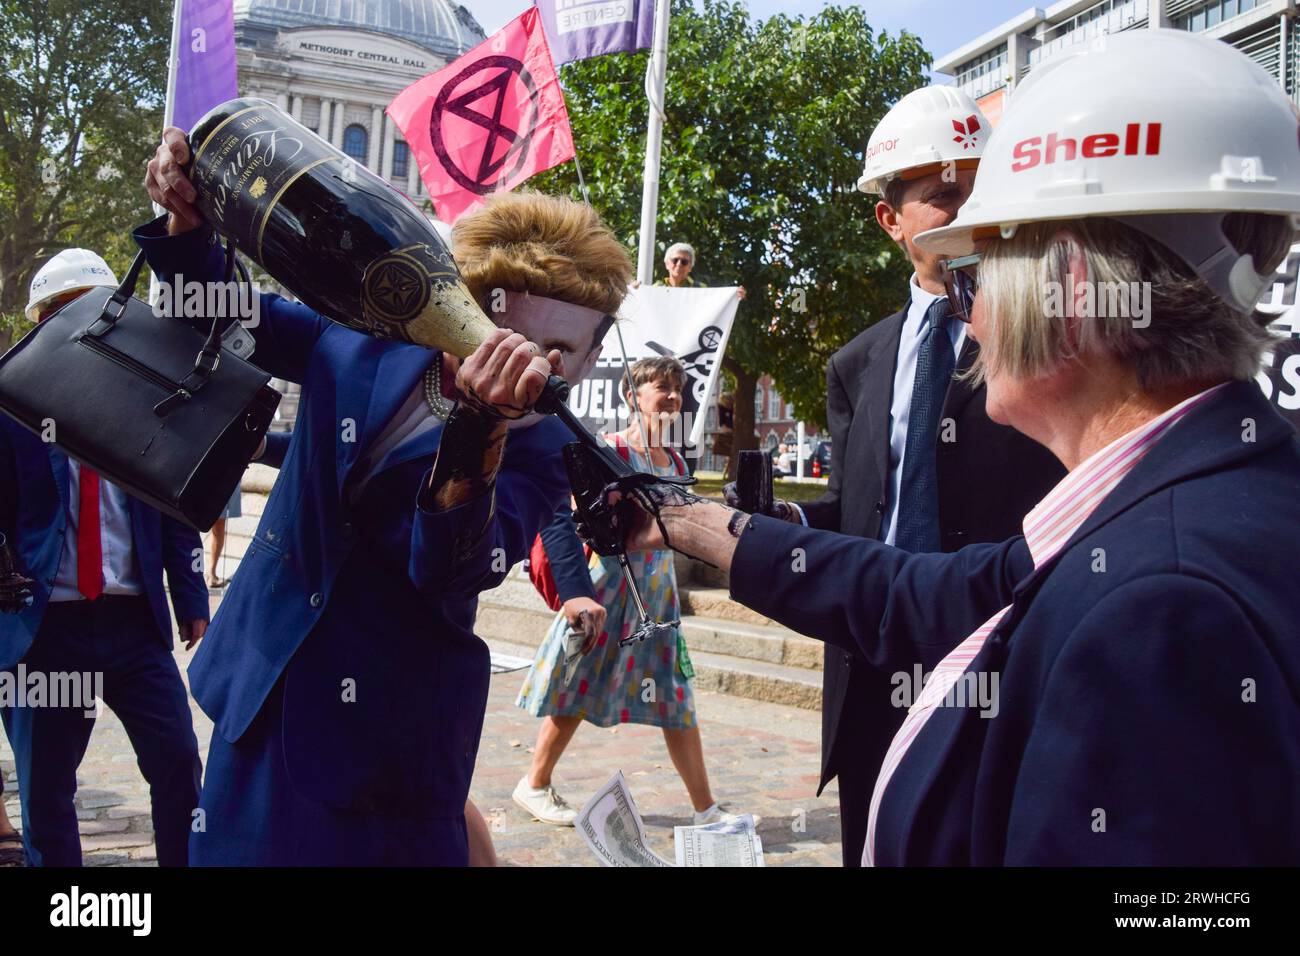 London, UK. 16th September 2023. Protesters dressed as executives from fossil fuel companies and Labour Party leader Keir Starmer pour fake oil from a champagne bottle as Extinction Rebellion stage a protest against new fossil fuels. Stock Photo